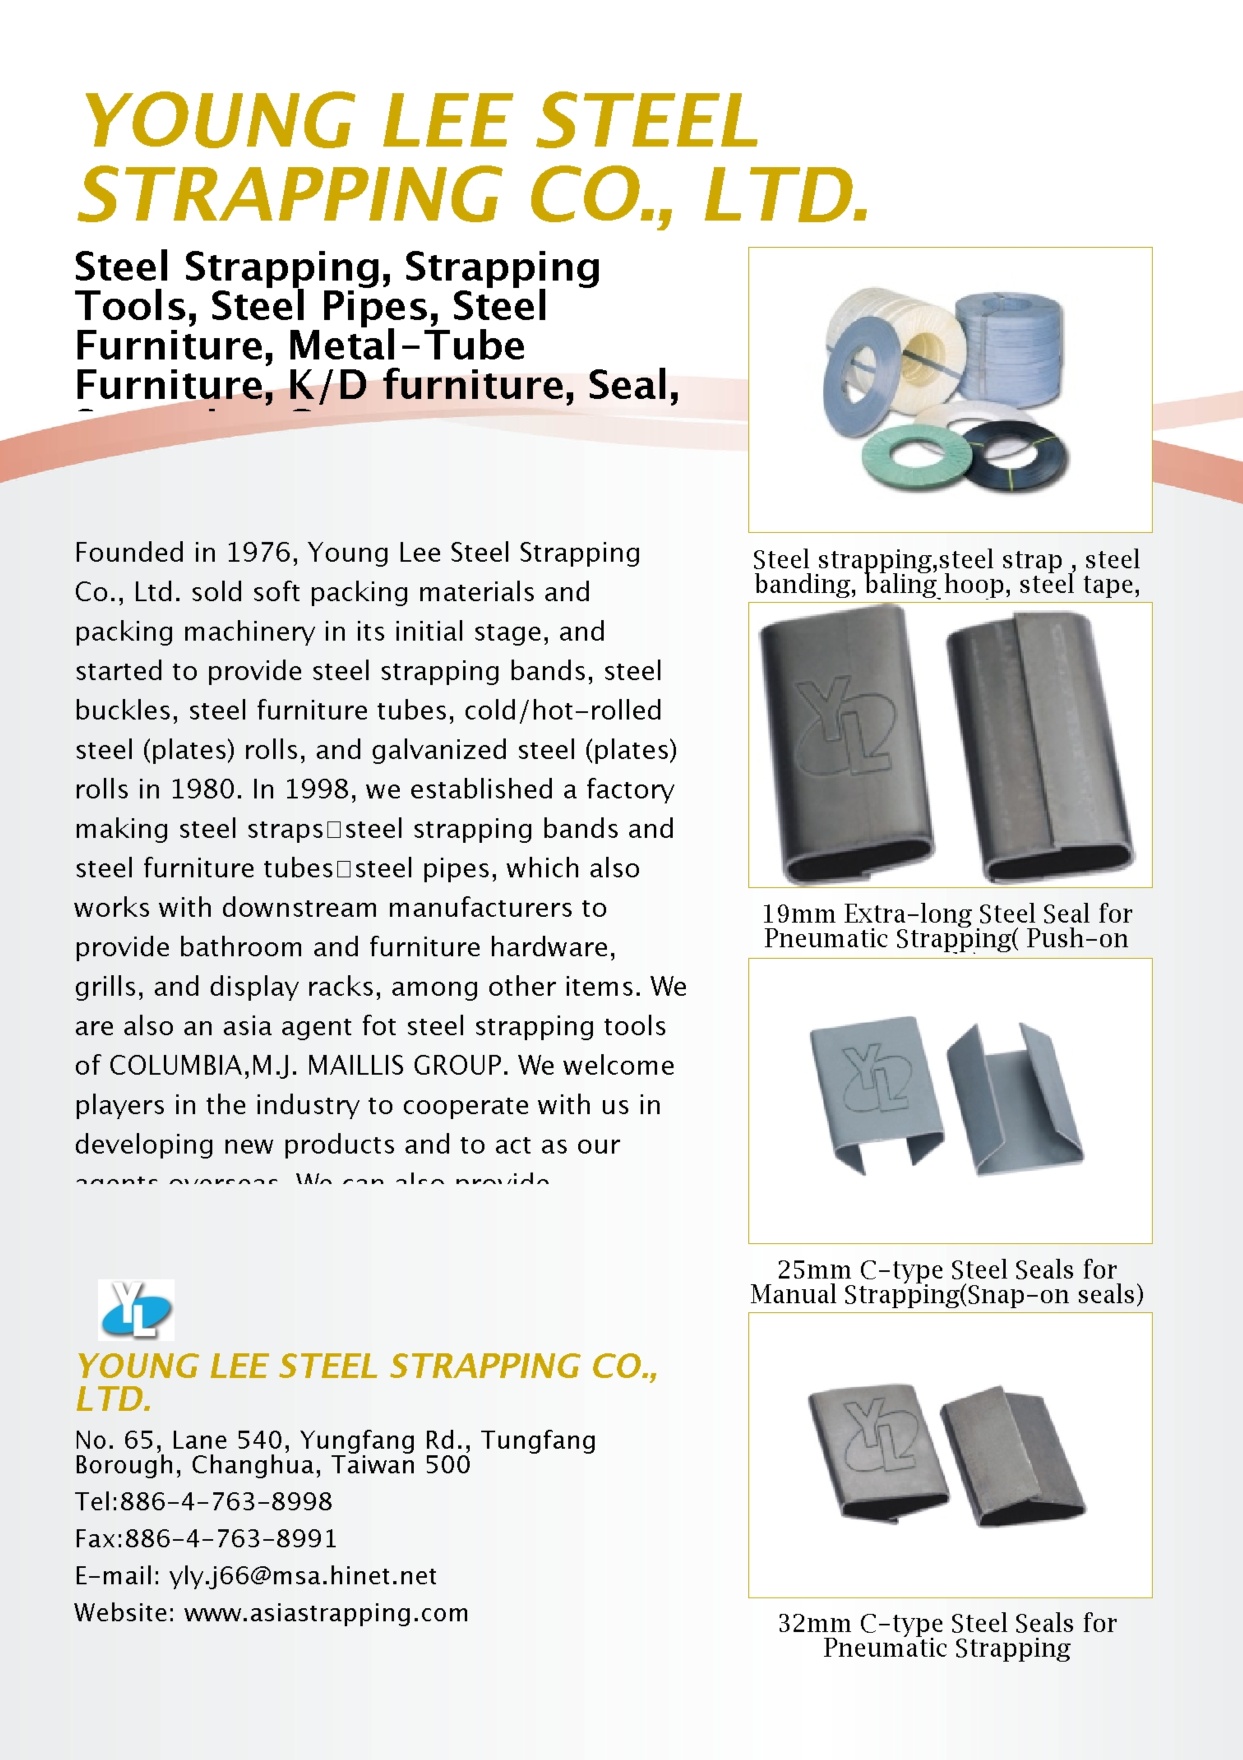 YOUNG LEE STEEL STRAPPING CO., LTD.